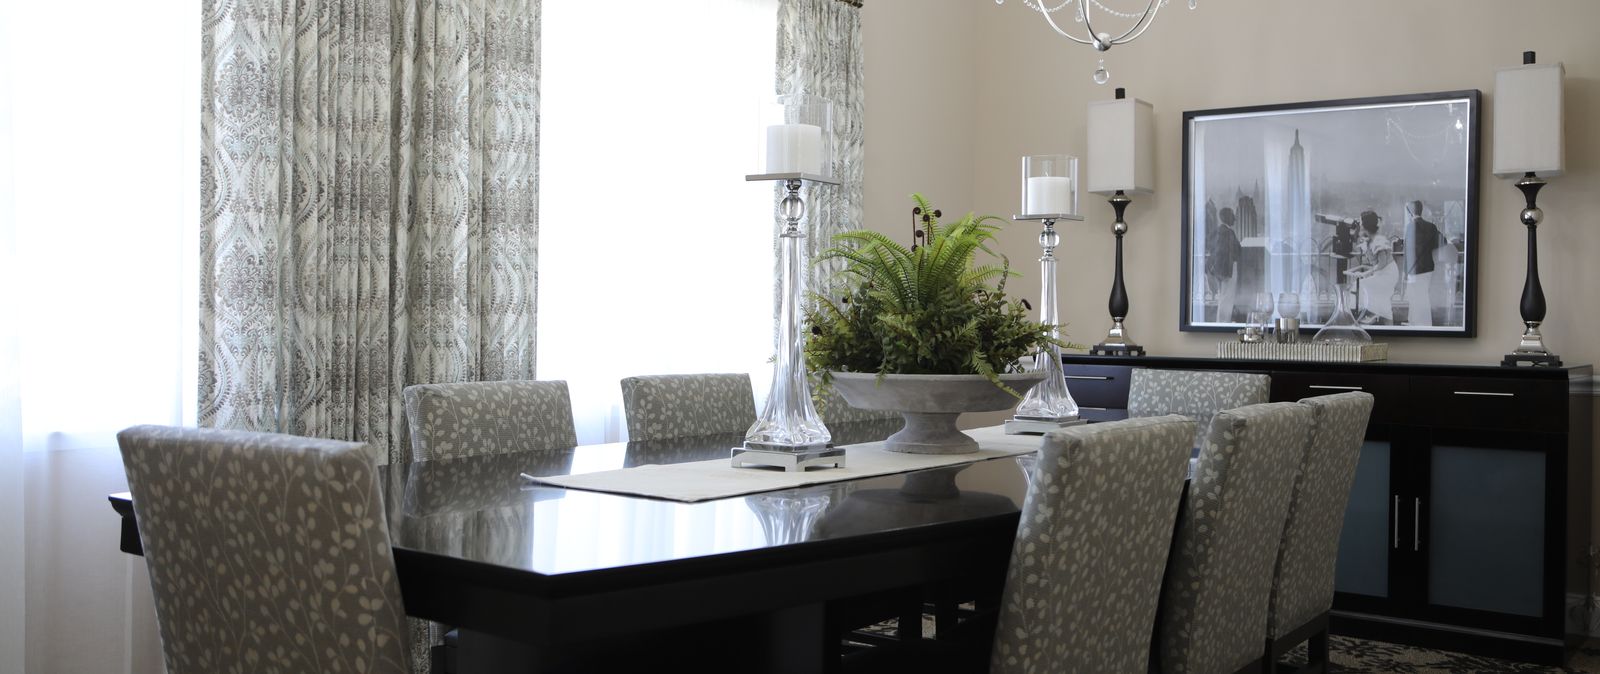 The Brook of Portland formal dining room